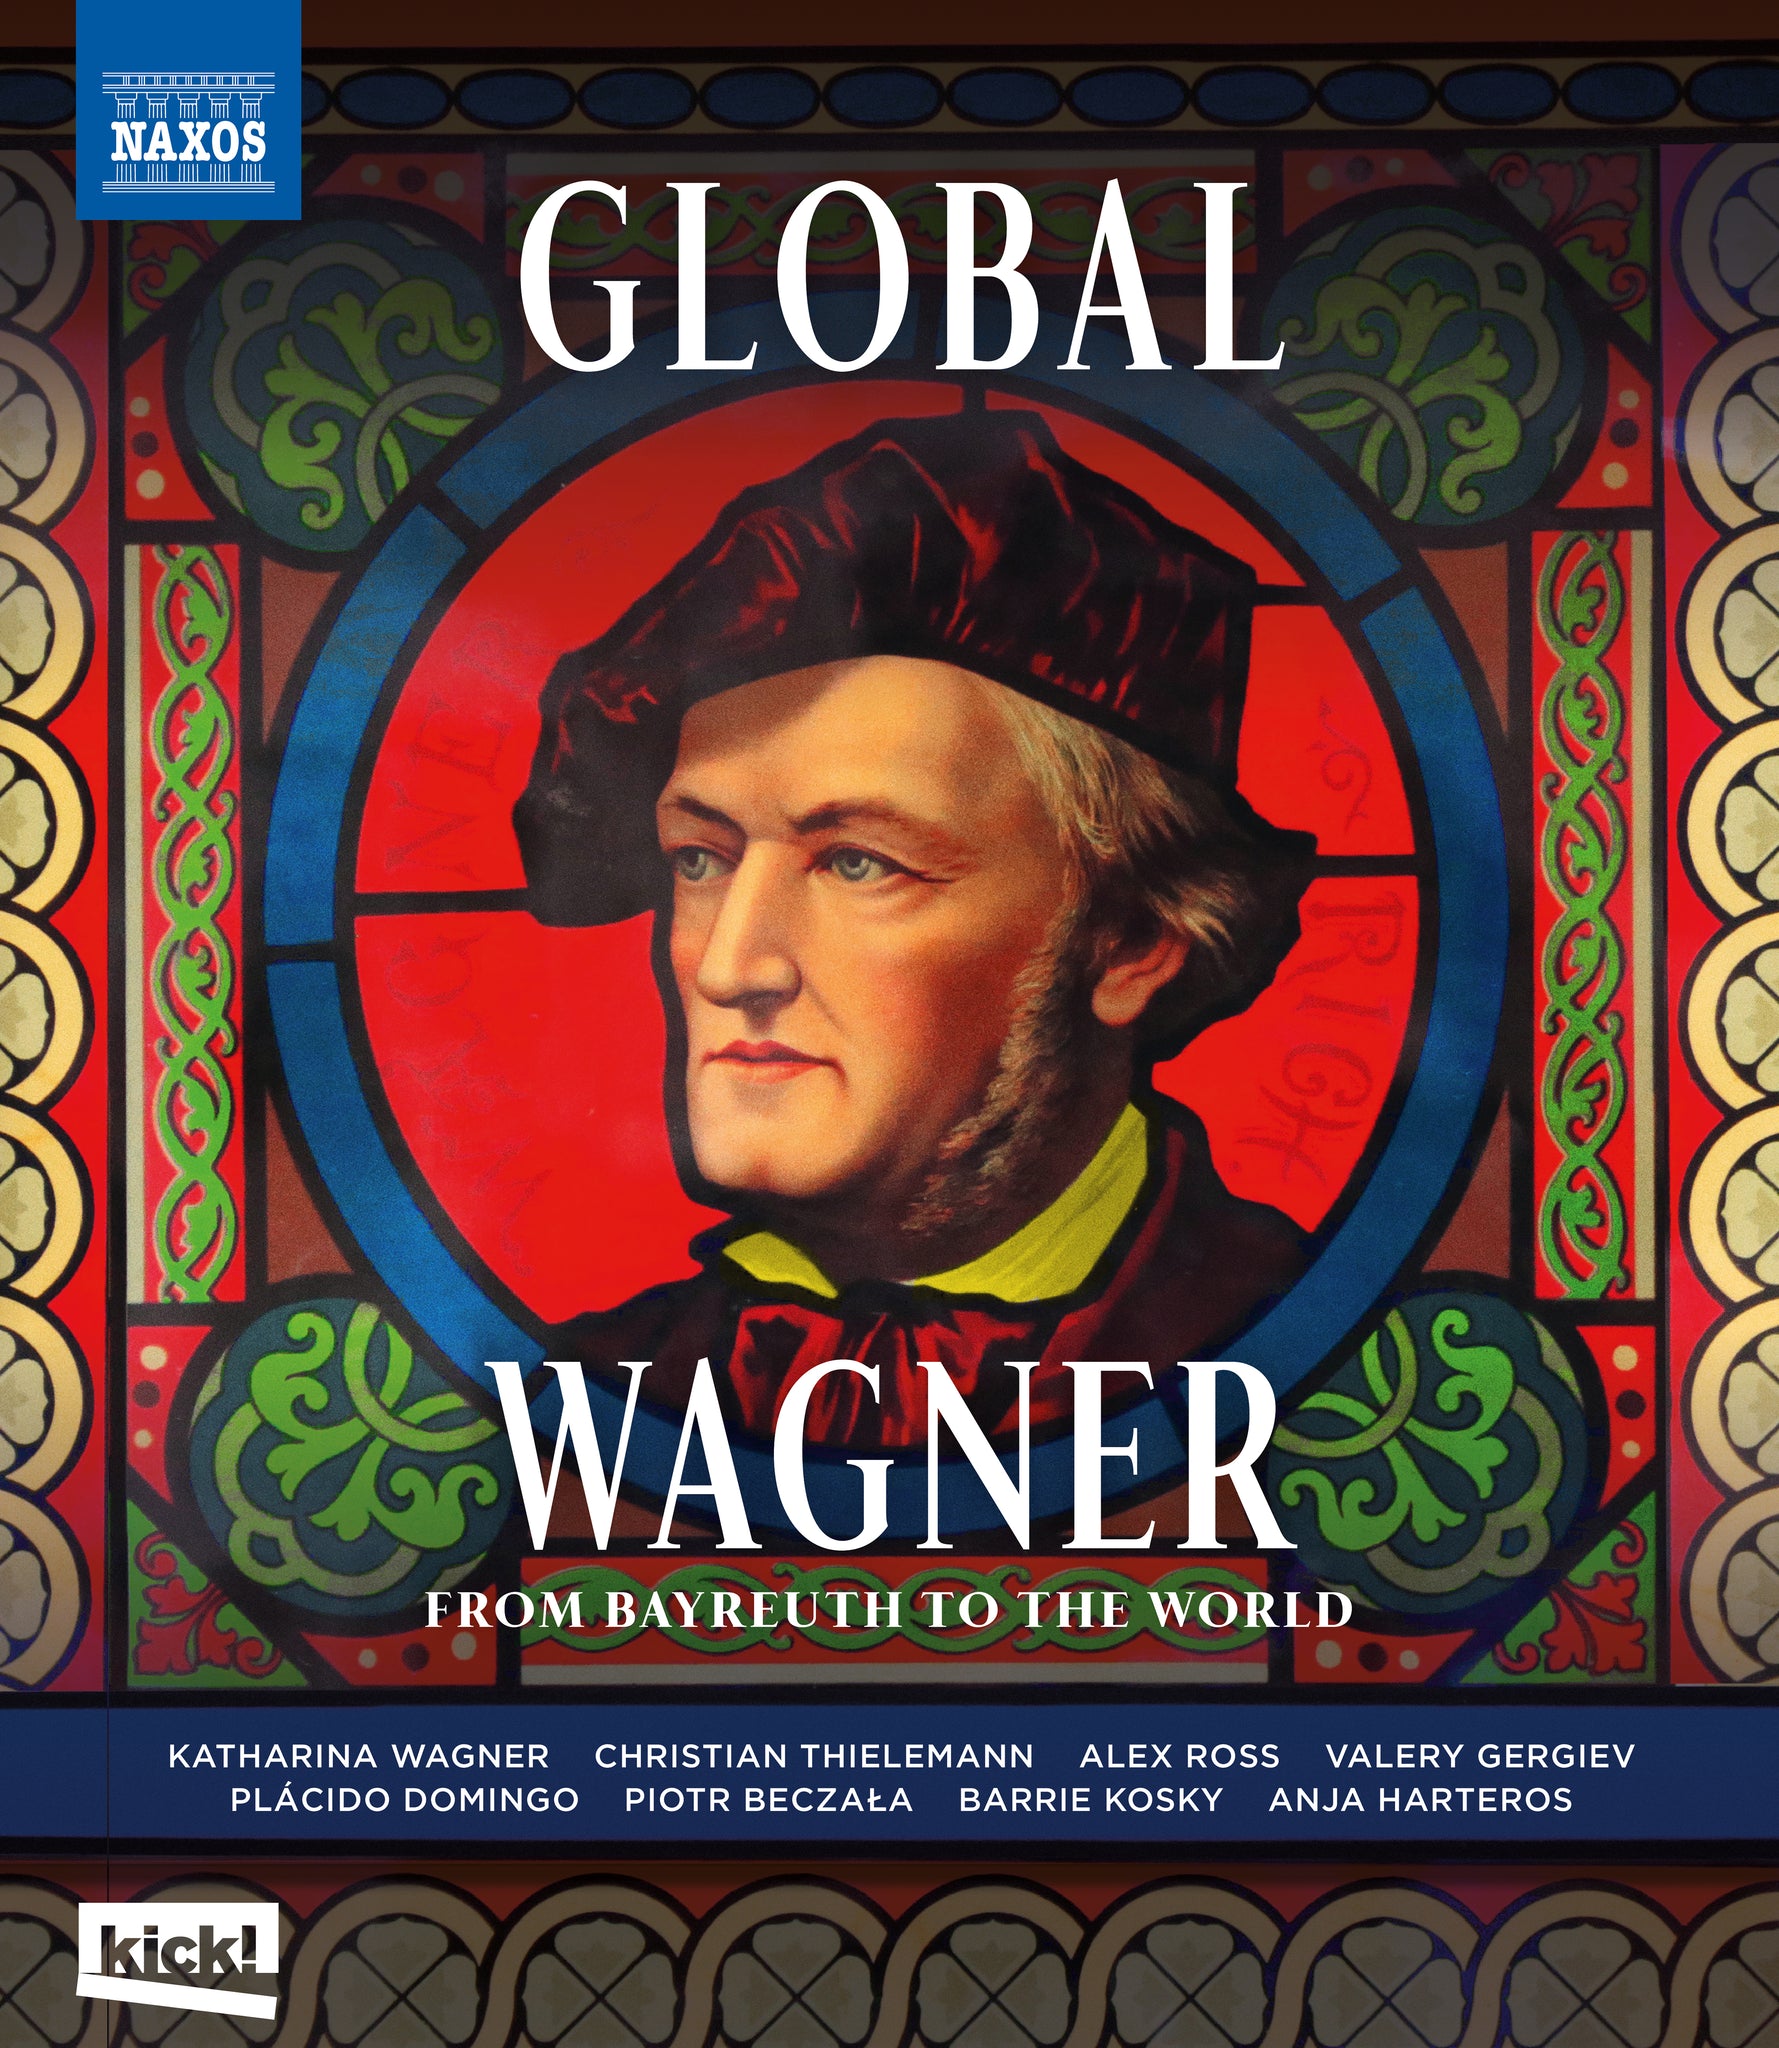 Global Wagner – Bayreuth to the World ft. Katharina Wagner, Alex Ross & More